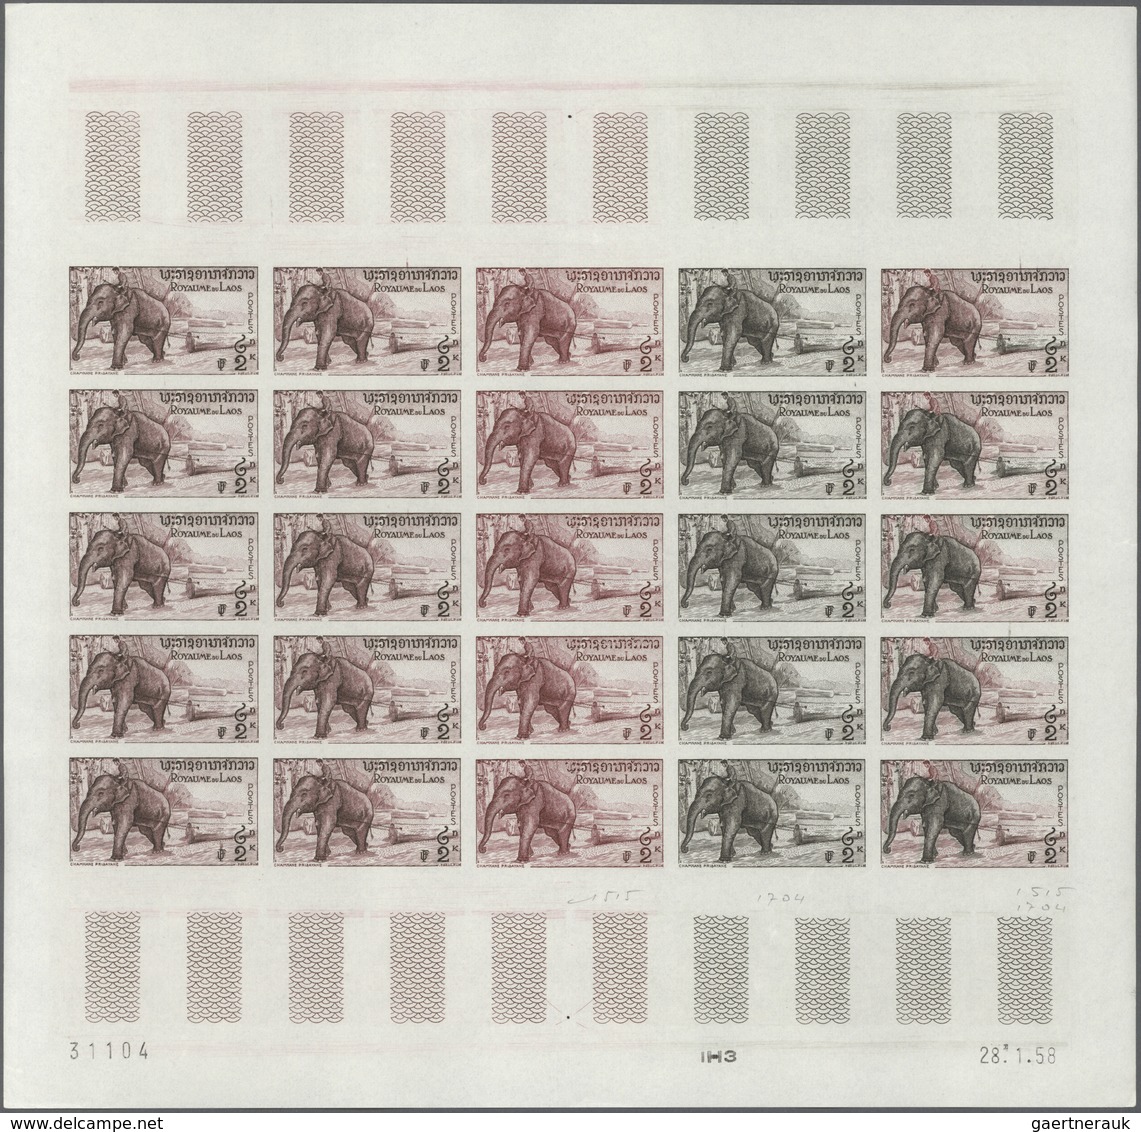 Laos: 1958. Complete set (7 values) in 7 color proof sheets of 25 showing various ELEPHANTS. Each sh